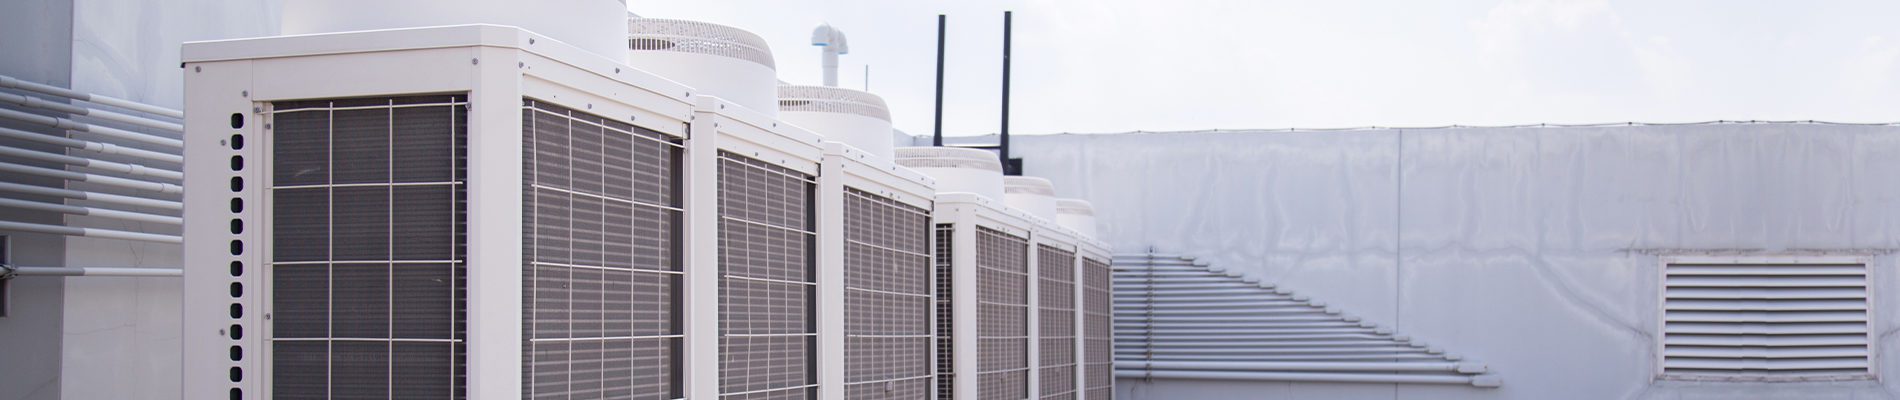 Standard Heating & Cooling | Peoria IL